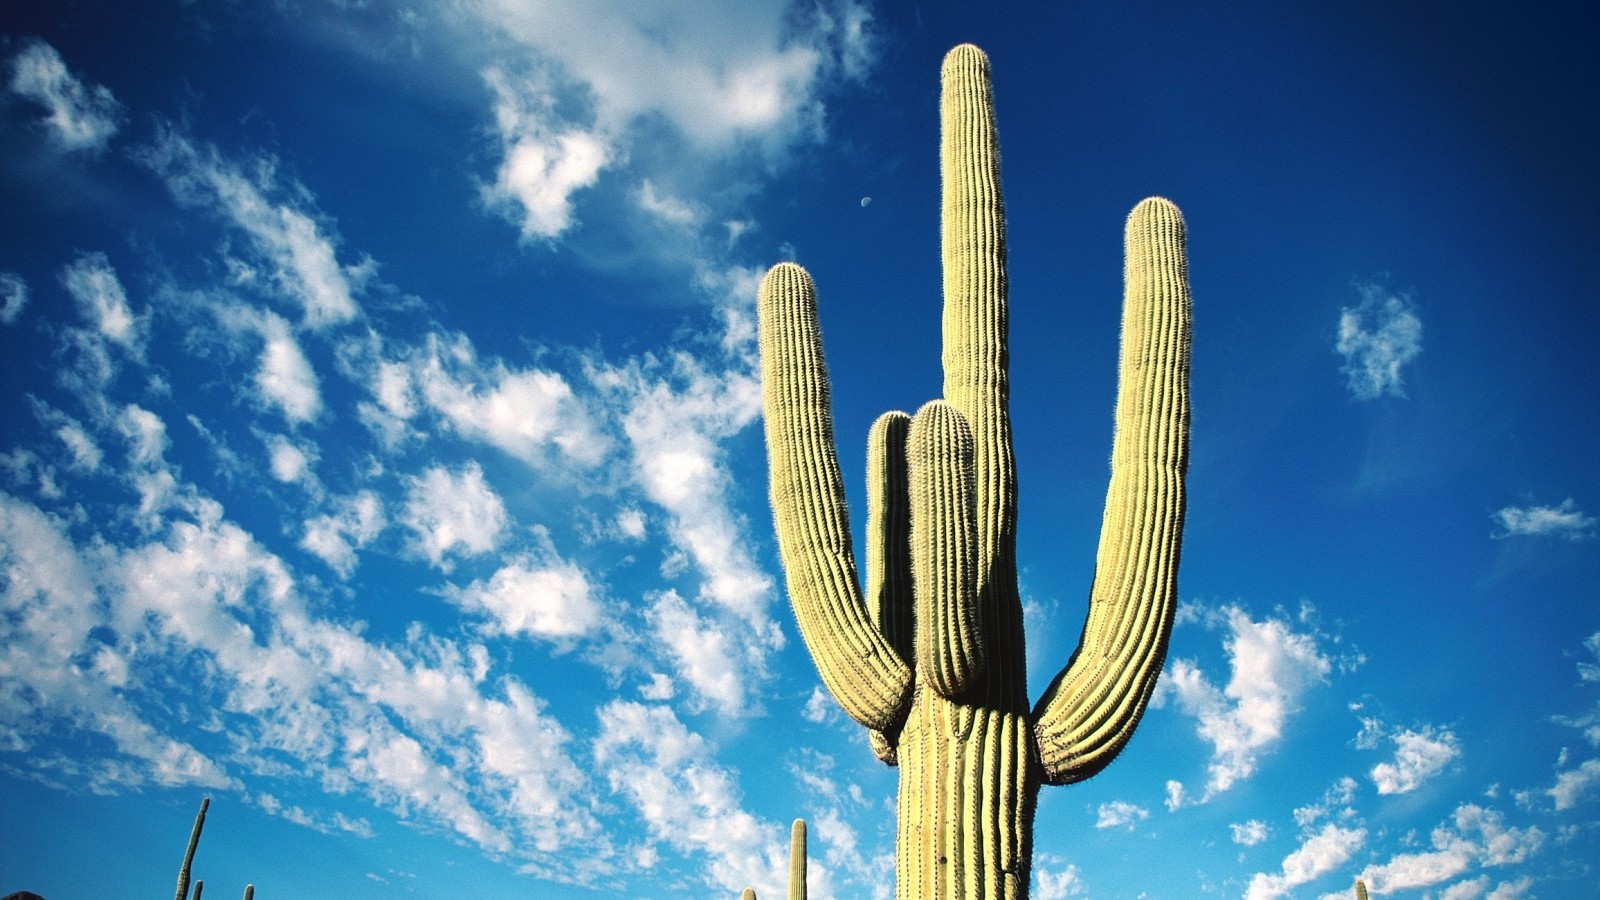 Cactus Wallpaper HD Pictures One